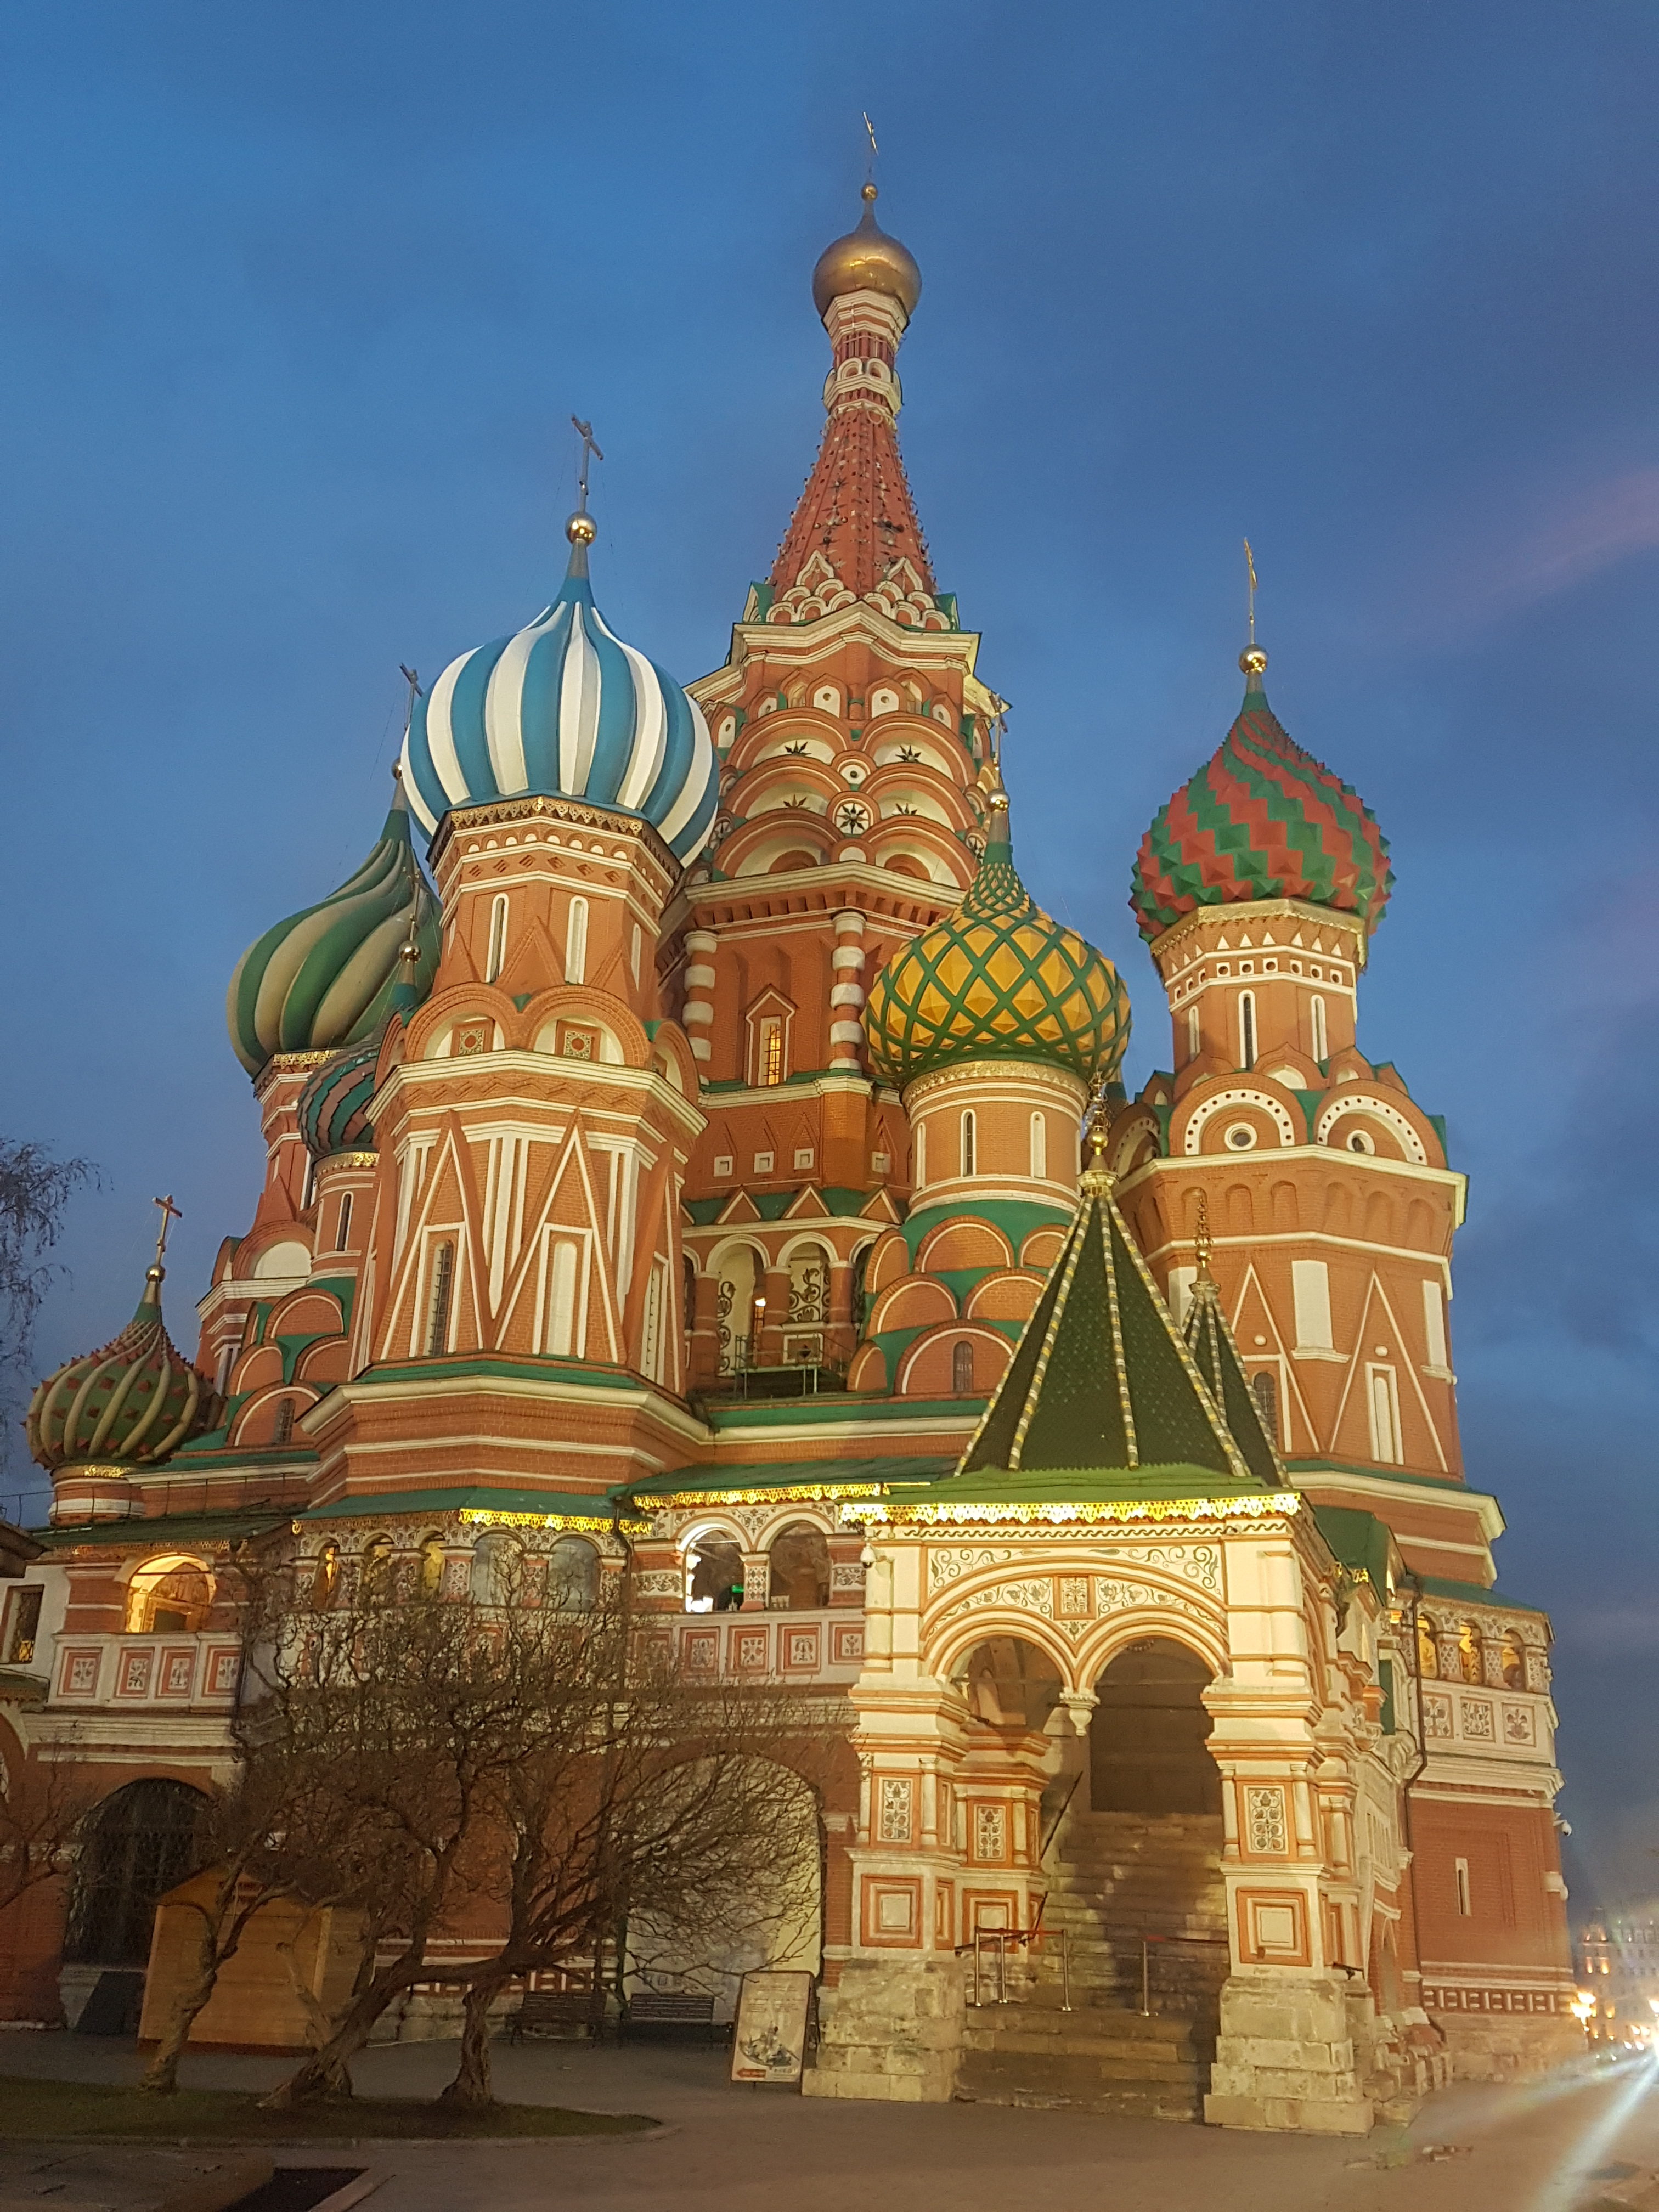 Global chilled water system service near Saint Basil's Cathedral